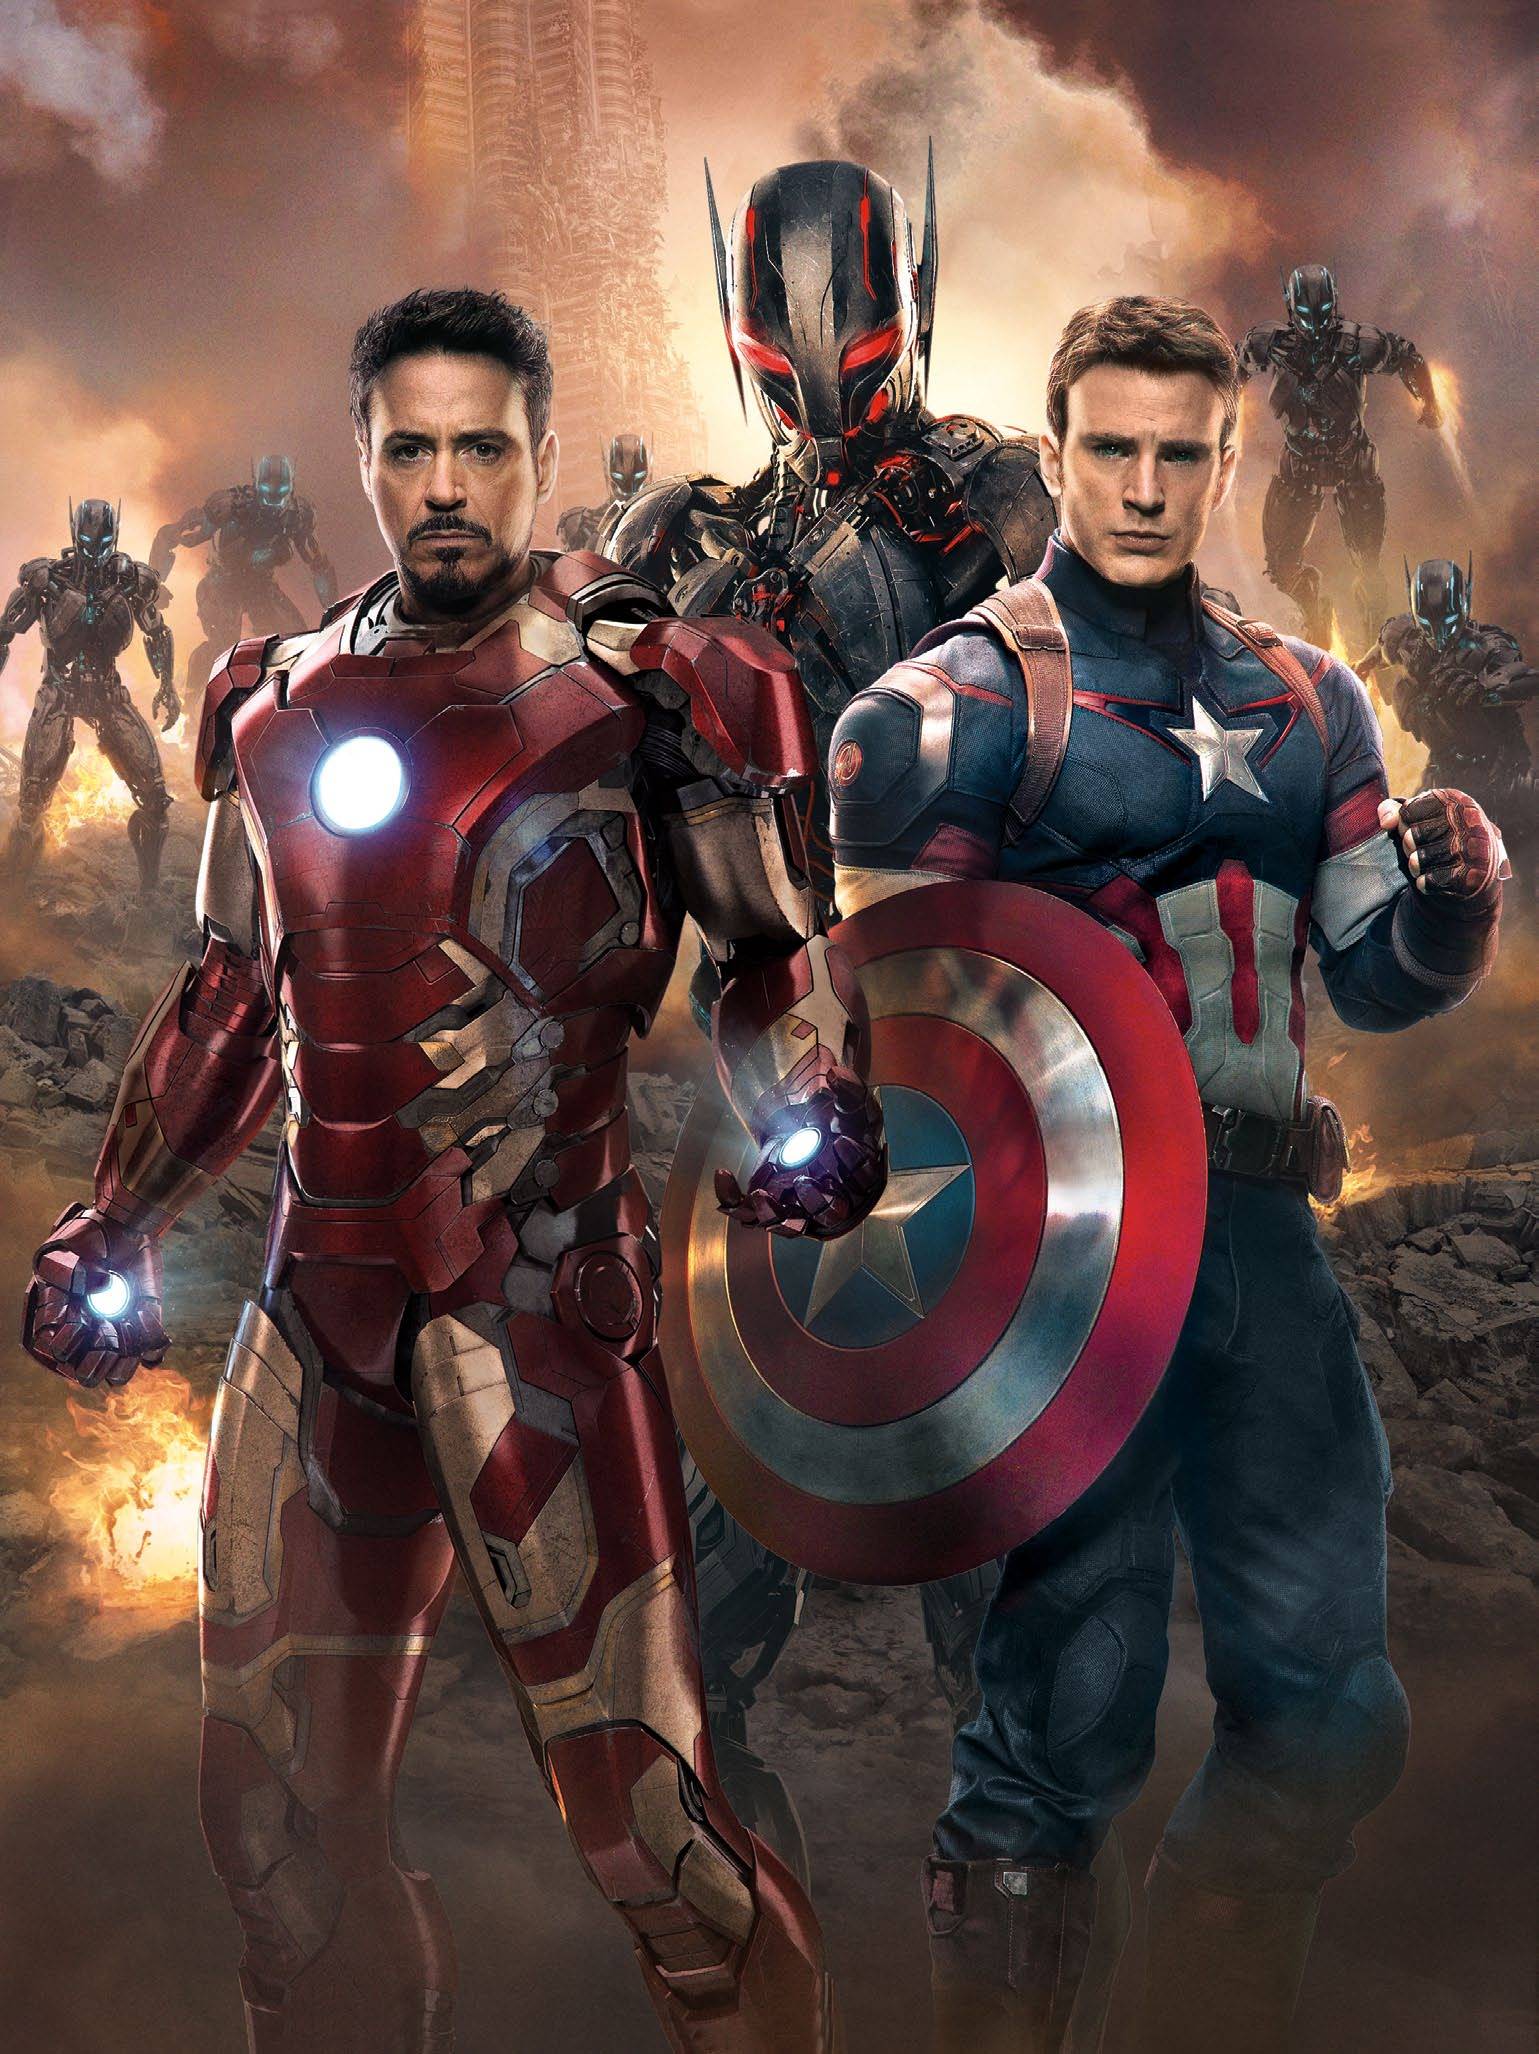 The Avengers Age Of Ultron Wallpaper - Free Android Application